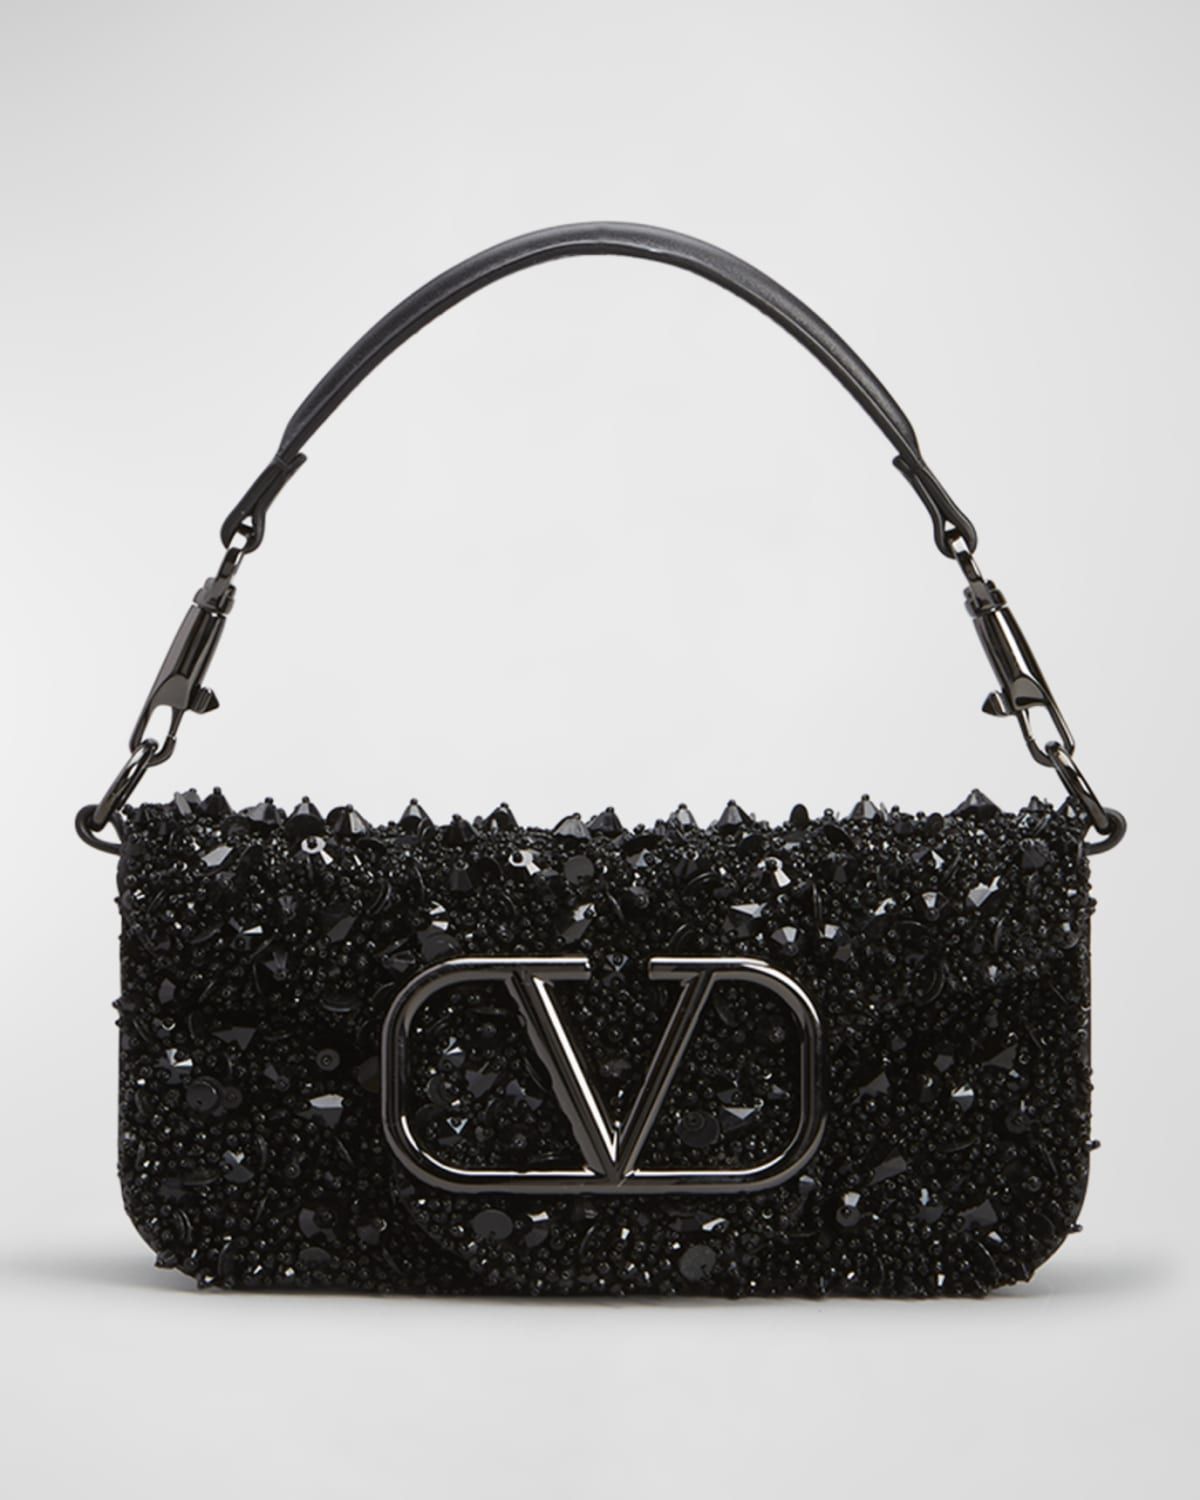 Valentino Bags: Luxury Accessories for the Fashionable Woman